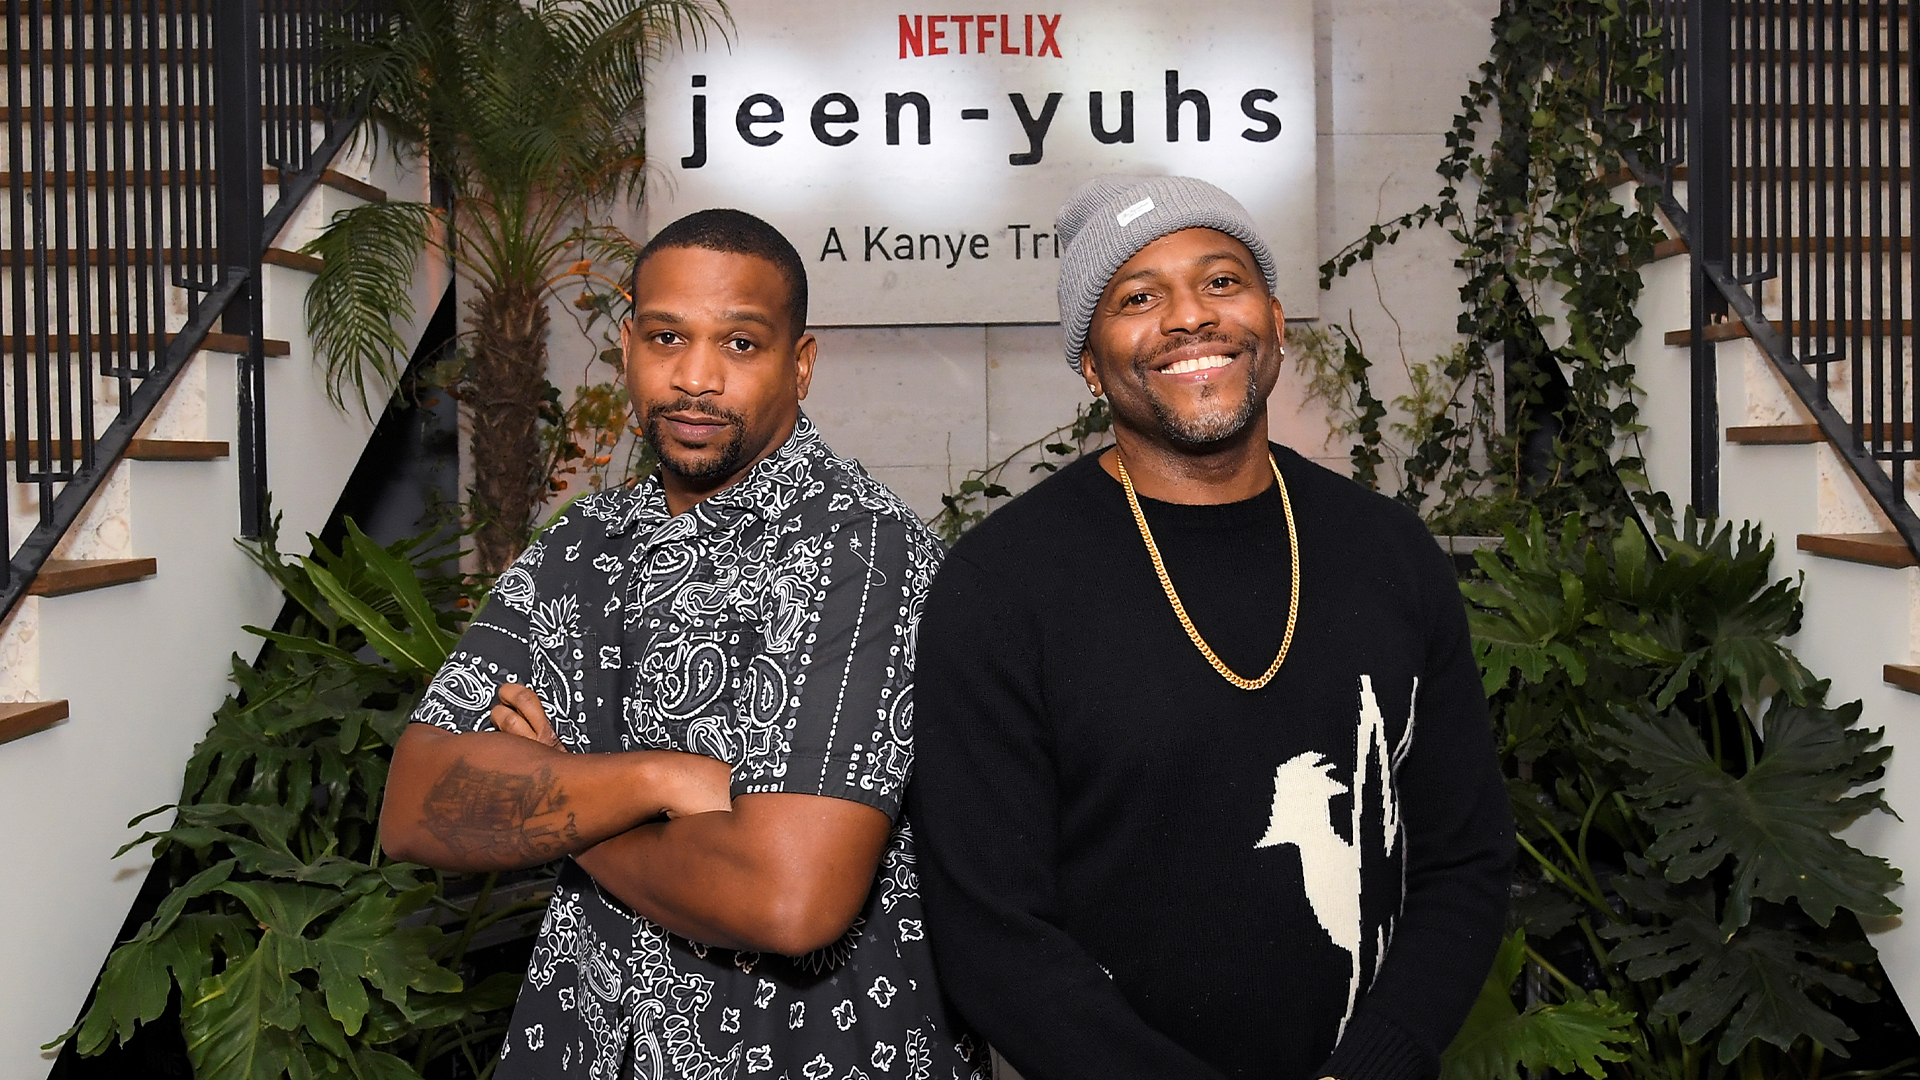 Coodie And Chike Took Over 20 Years To Make The Kanye West Doc — But Did Netflix Pay Them $30M?